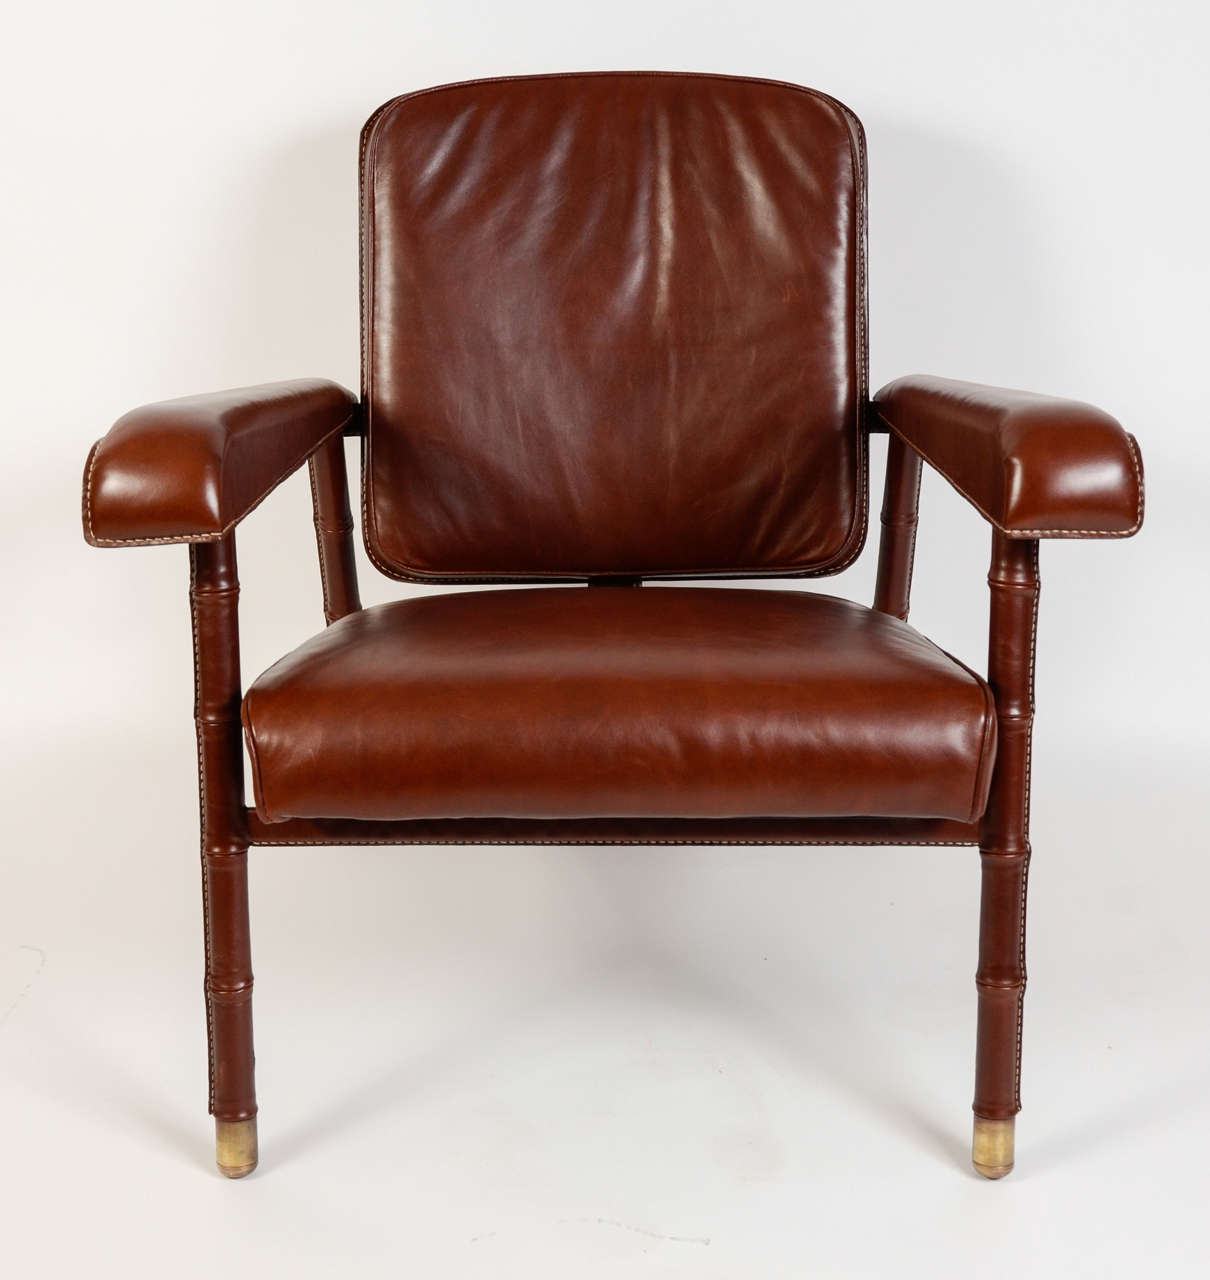 1950s armchairs in brown stitched leather designed by Jacques Adnet.